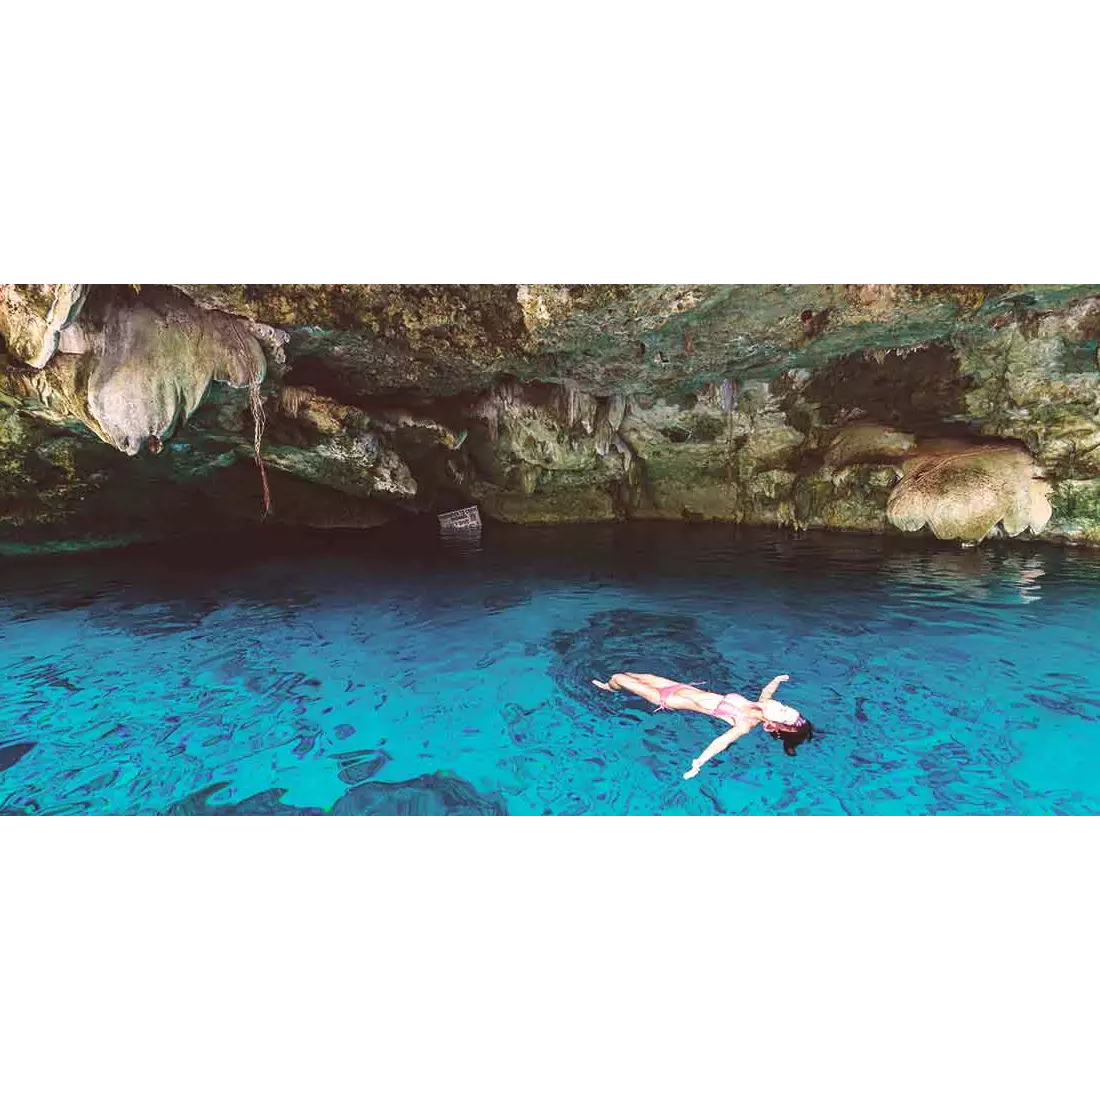 IV. The Importance of Cenotes in Mexican Culture